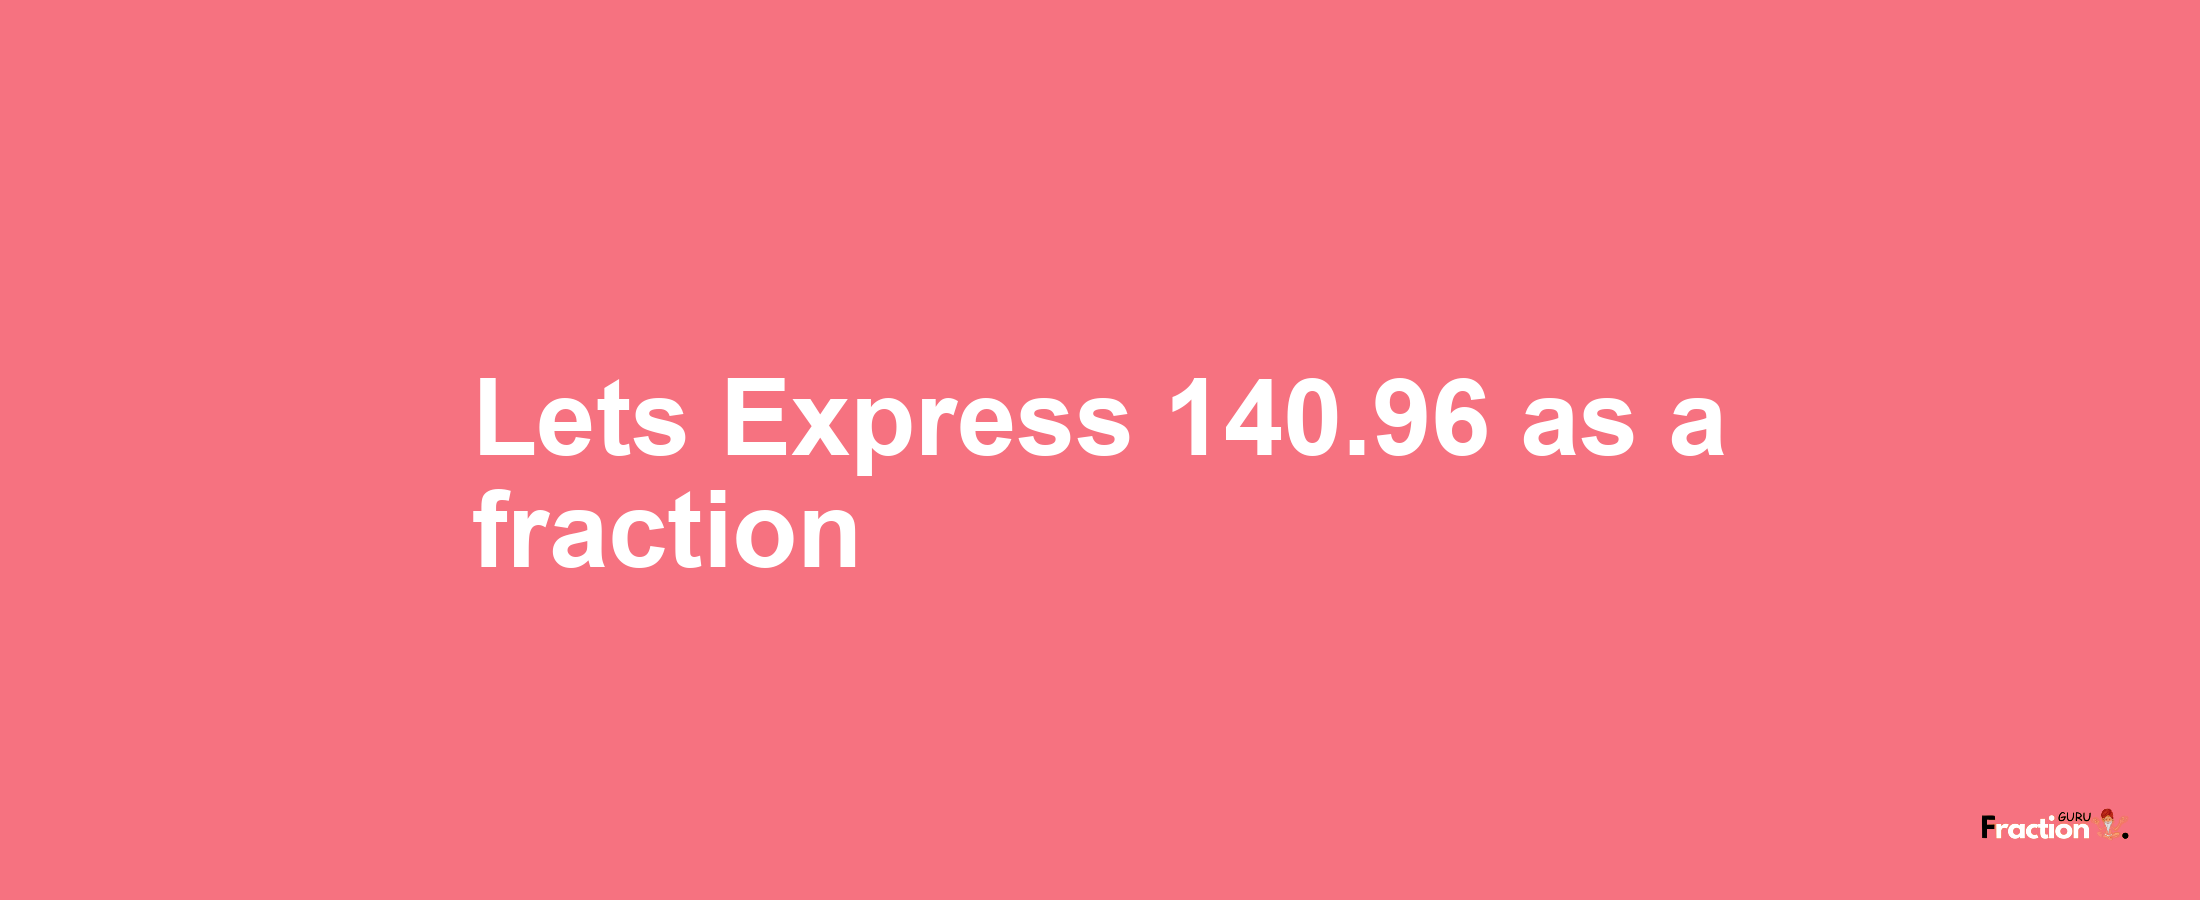 Lets Express 140.96 as afraction